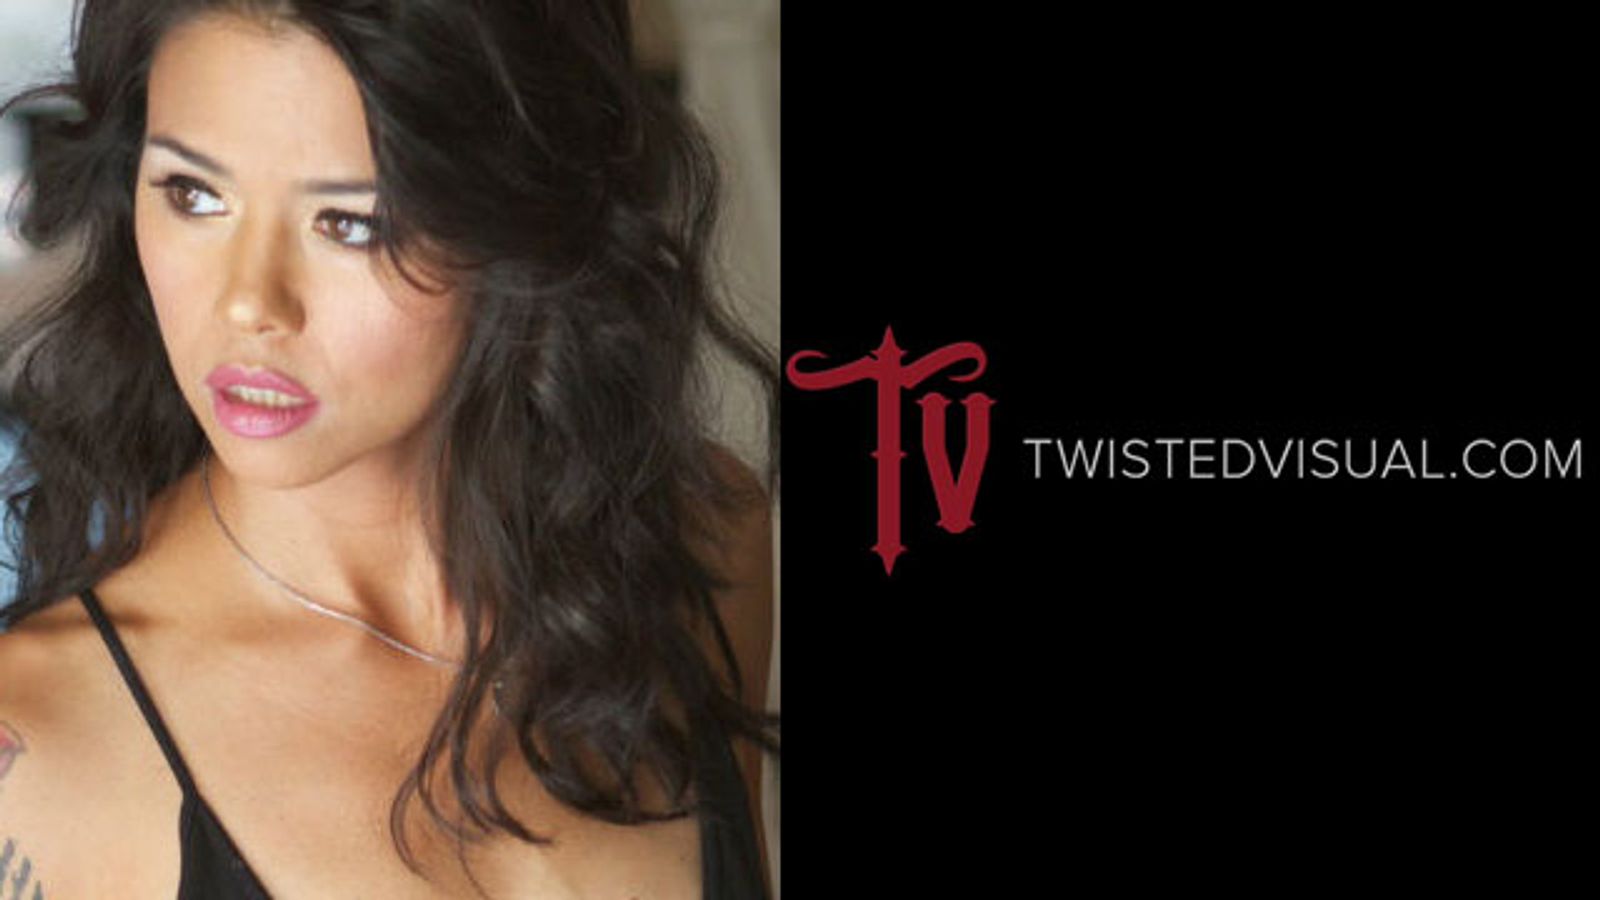 Vespoli Aims to Carve Out Niche With TwistedVisual.com